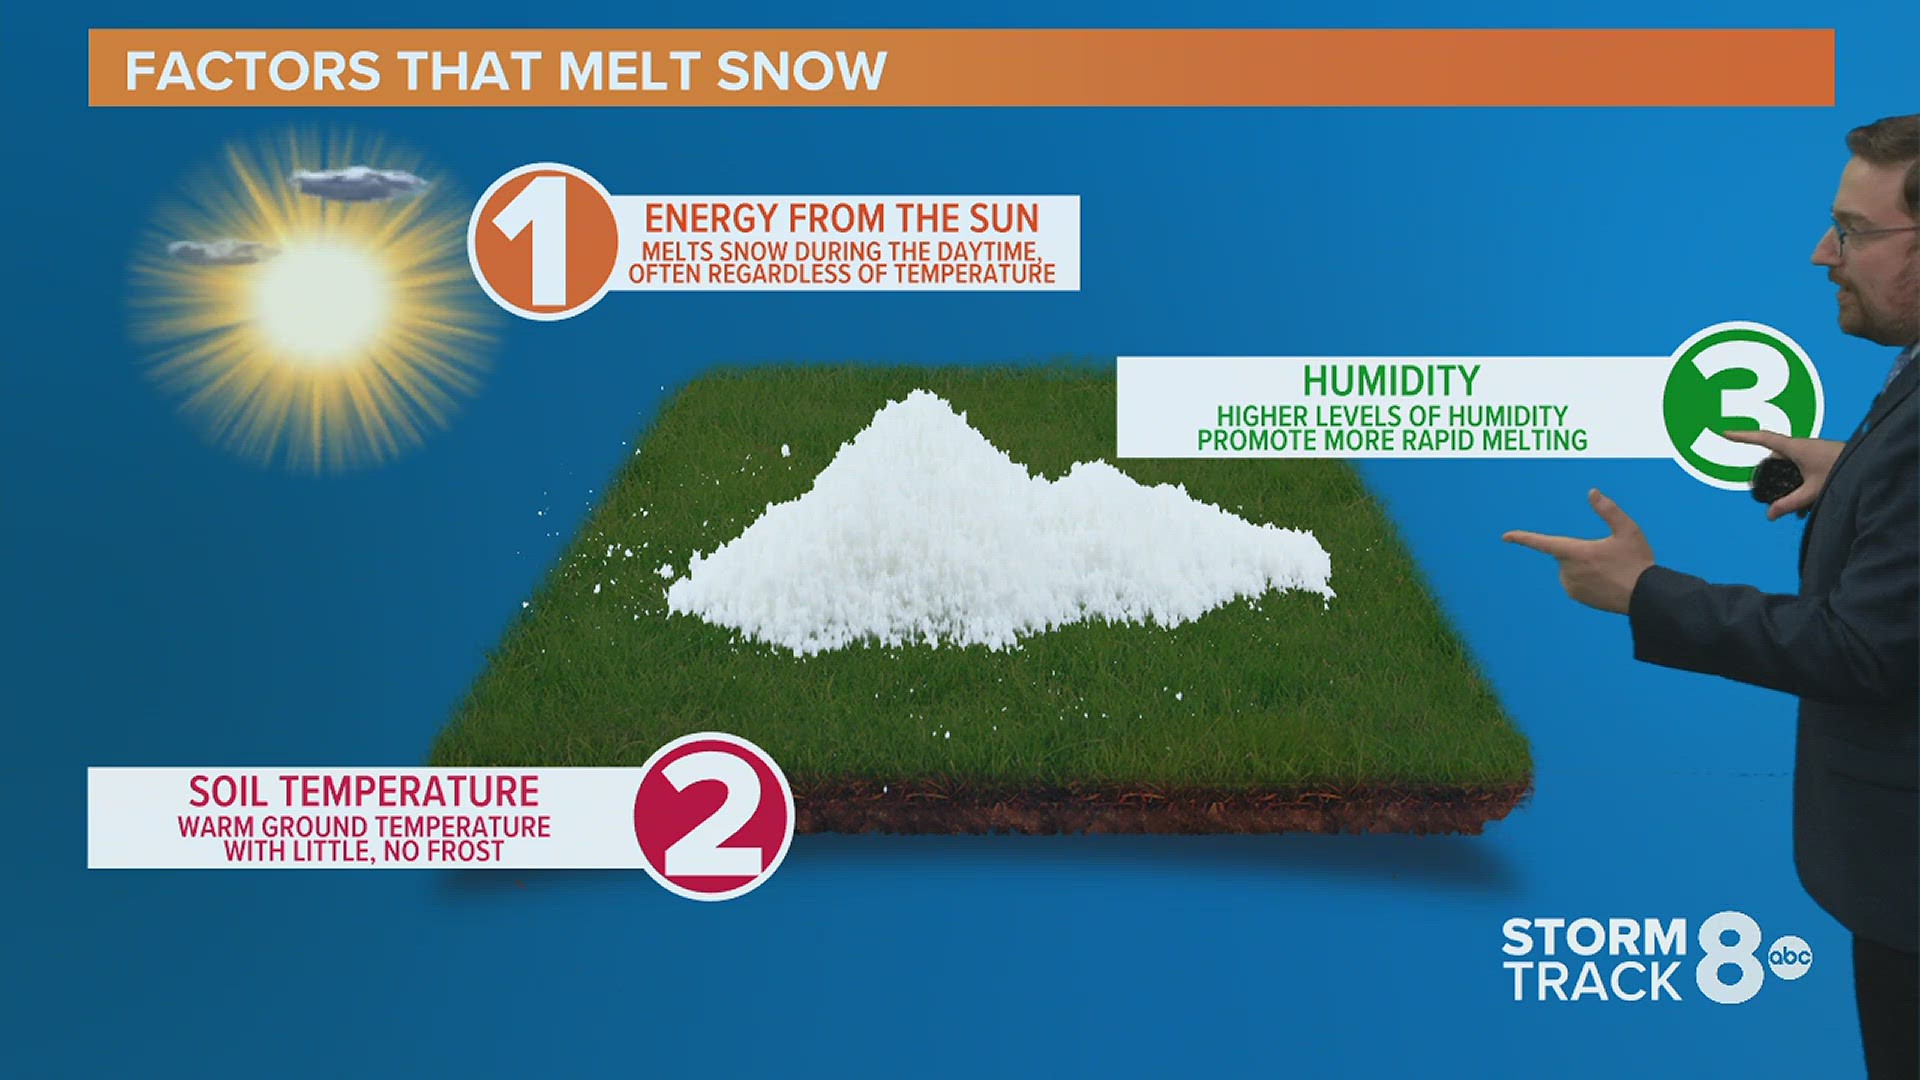 Can higher humidity levels help snow melt more quickly?